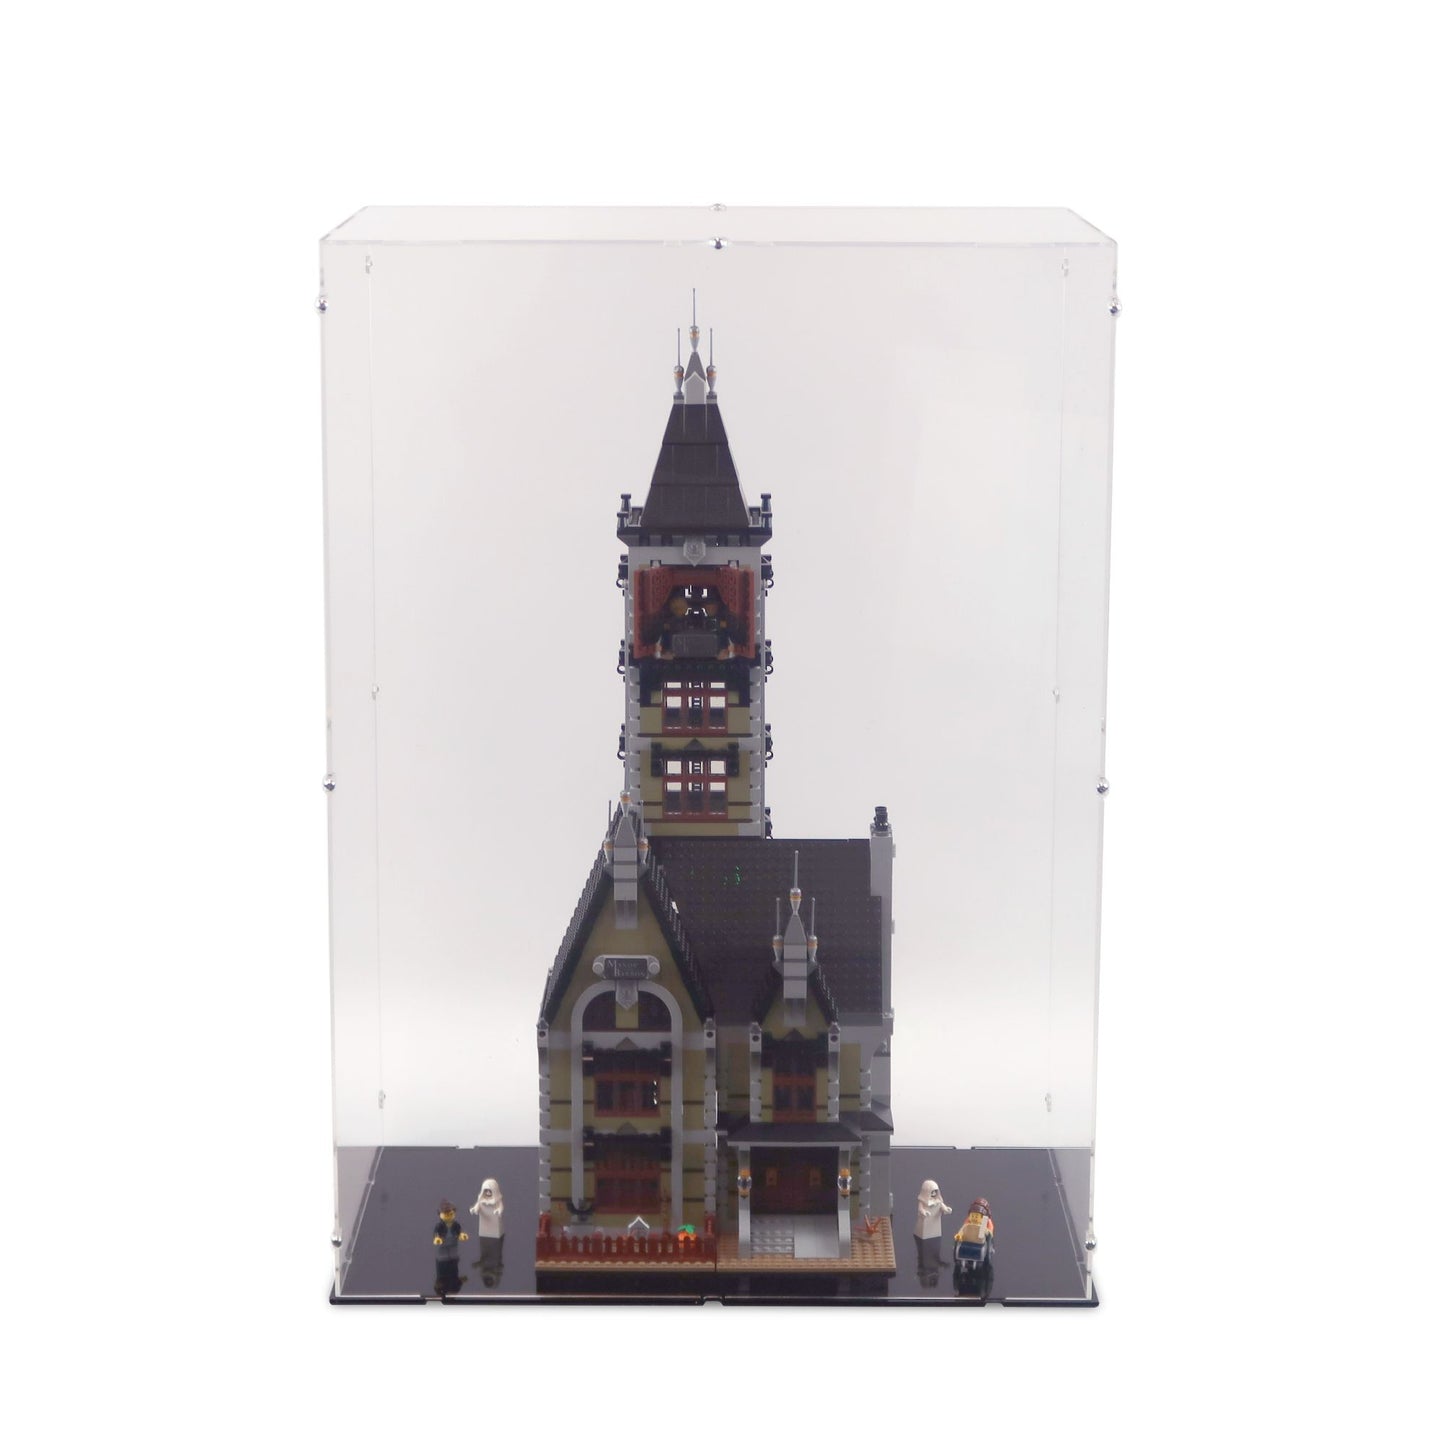 10273 Haunted House Display Case